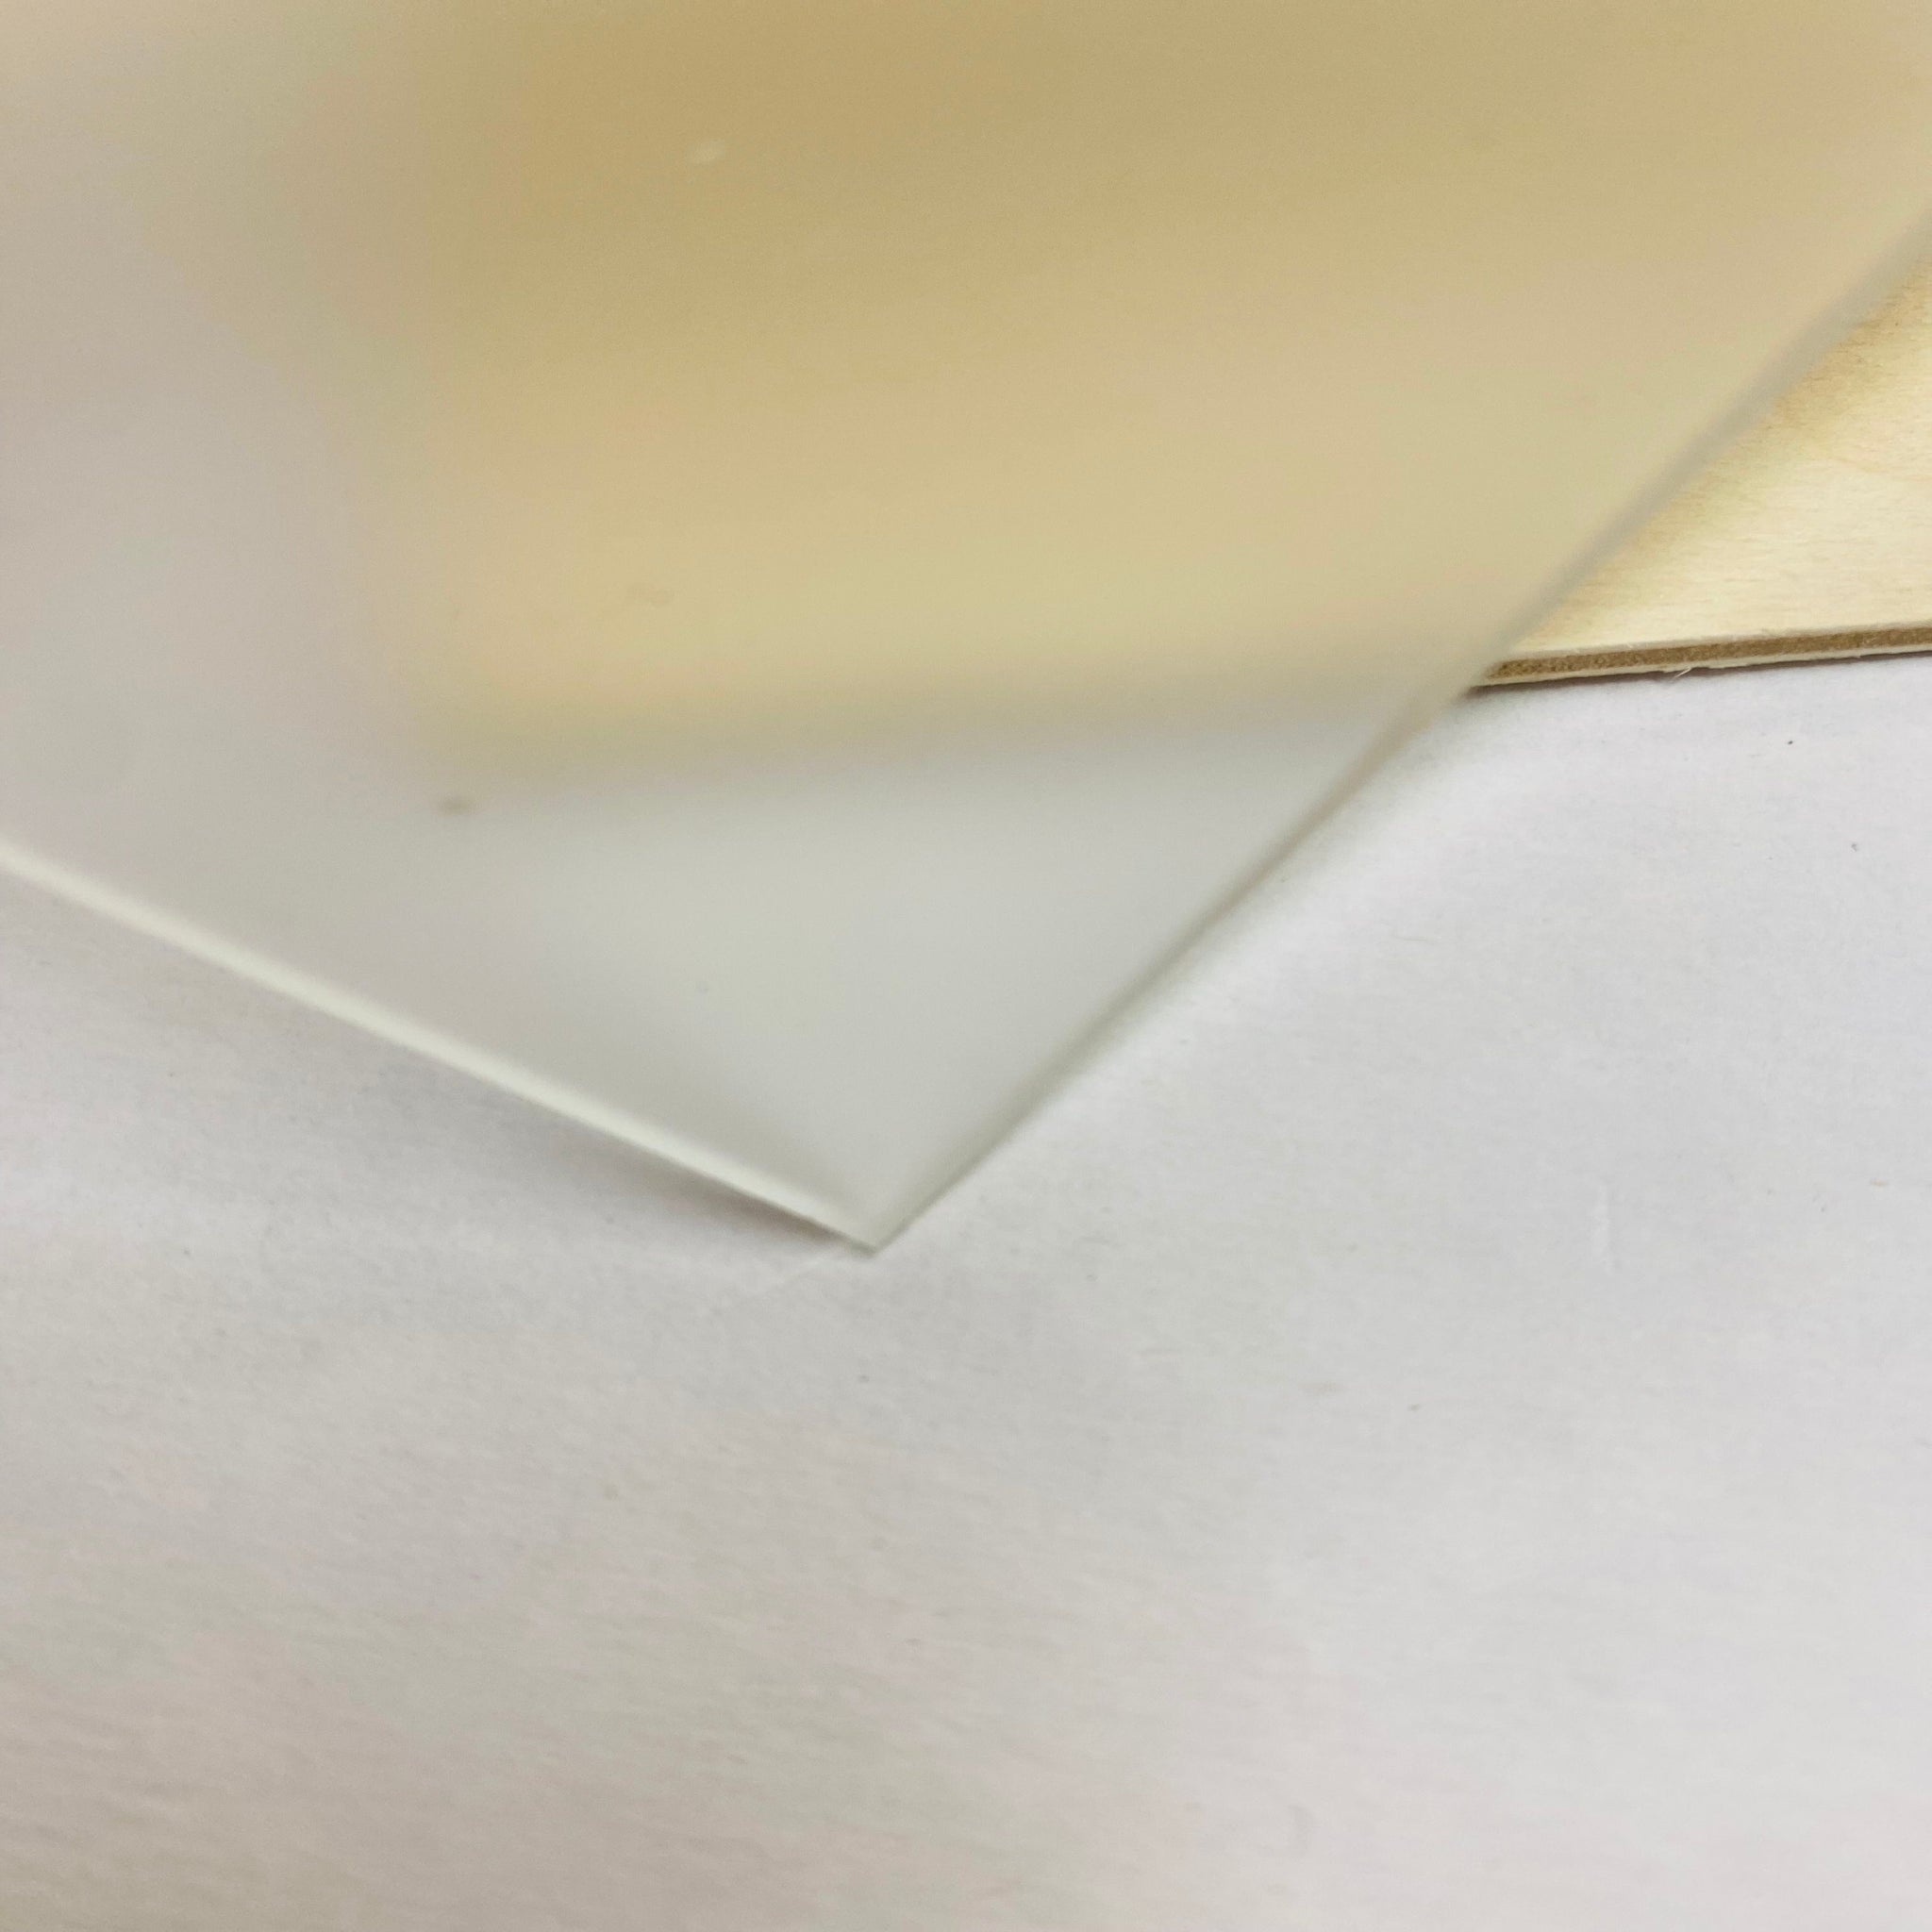 Plexiglass Sheets, Clear Acrylic Sheets, Transparent Acrylic Sheets for  Laser Cutting, Acrylic Plexiglass Sheets 1/4 Inch Thick Made in USA 